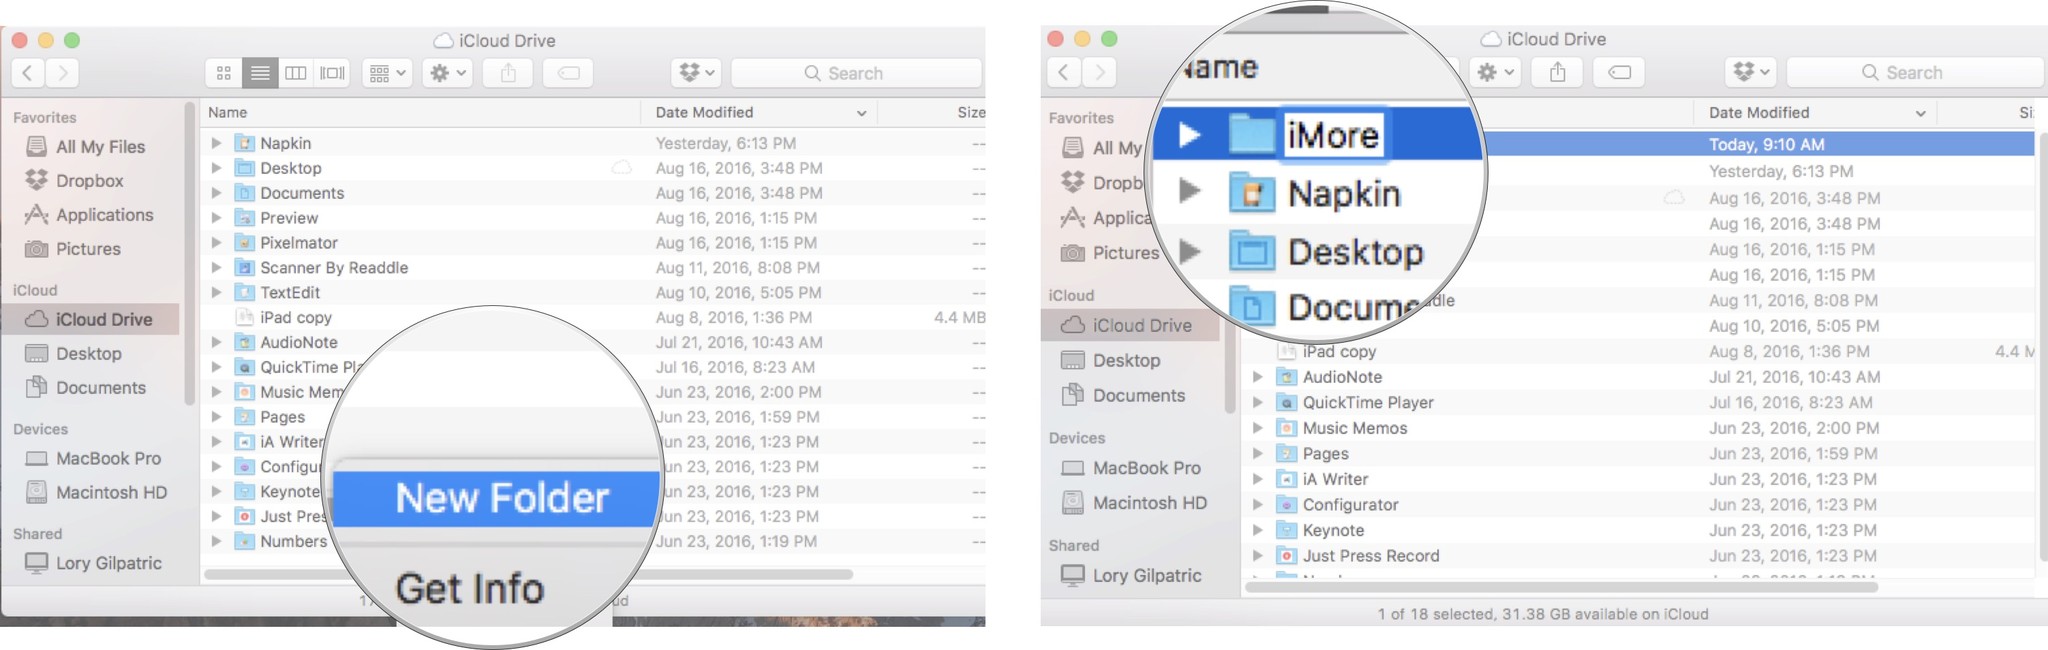 How to manually create a folder on Mac: Right click, Click on New Folder, Enter folder name.